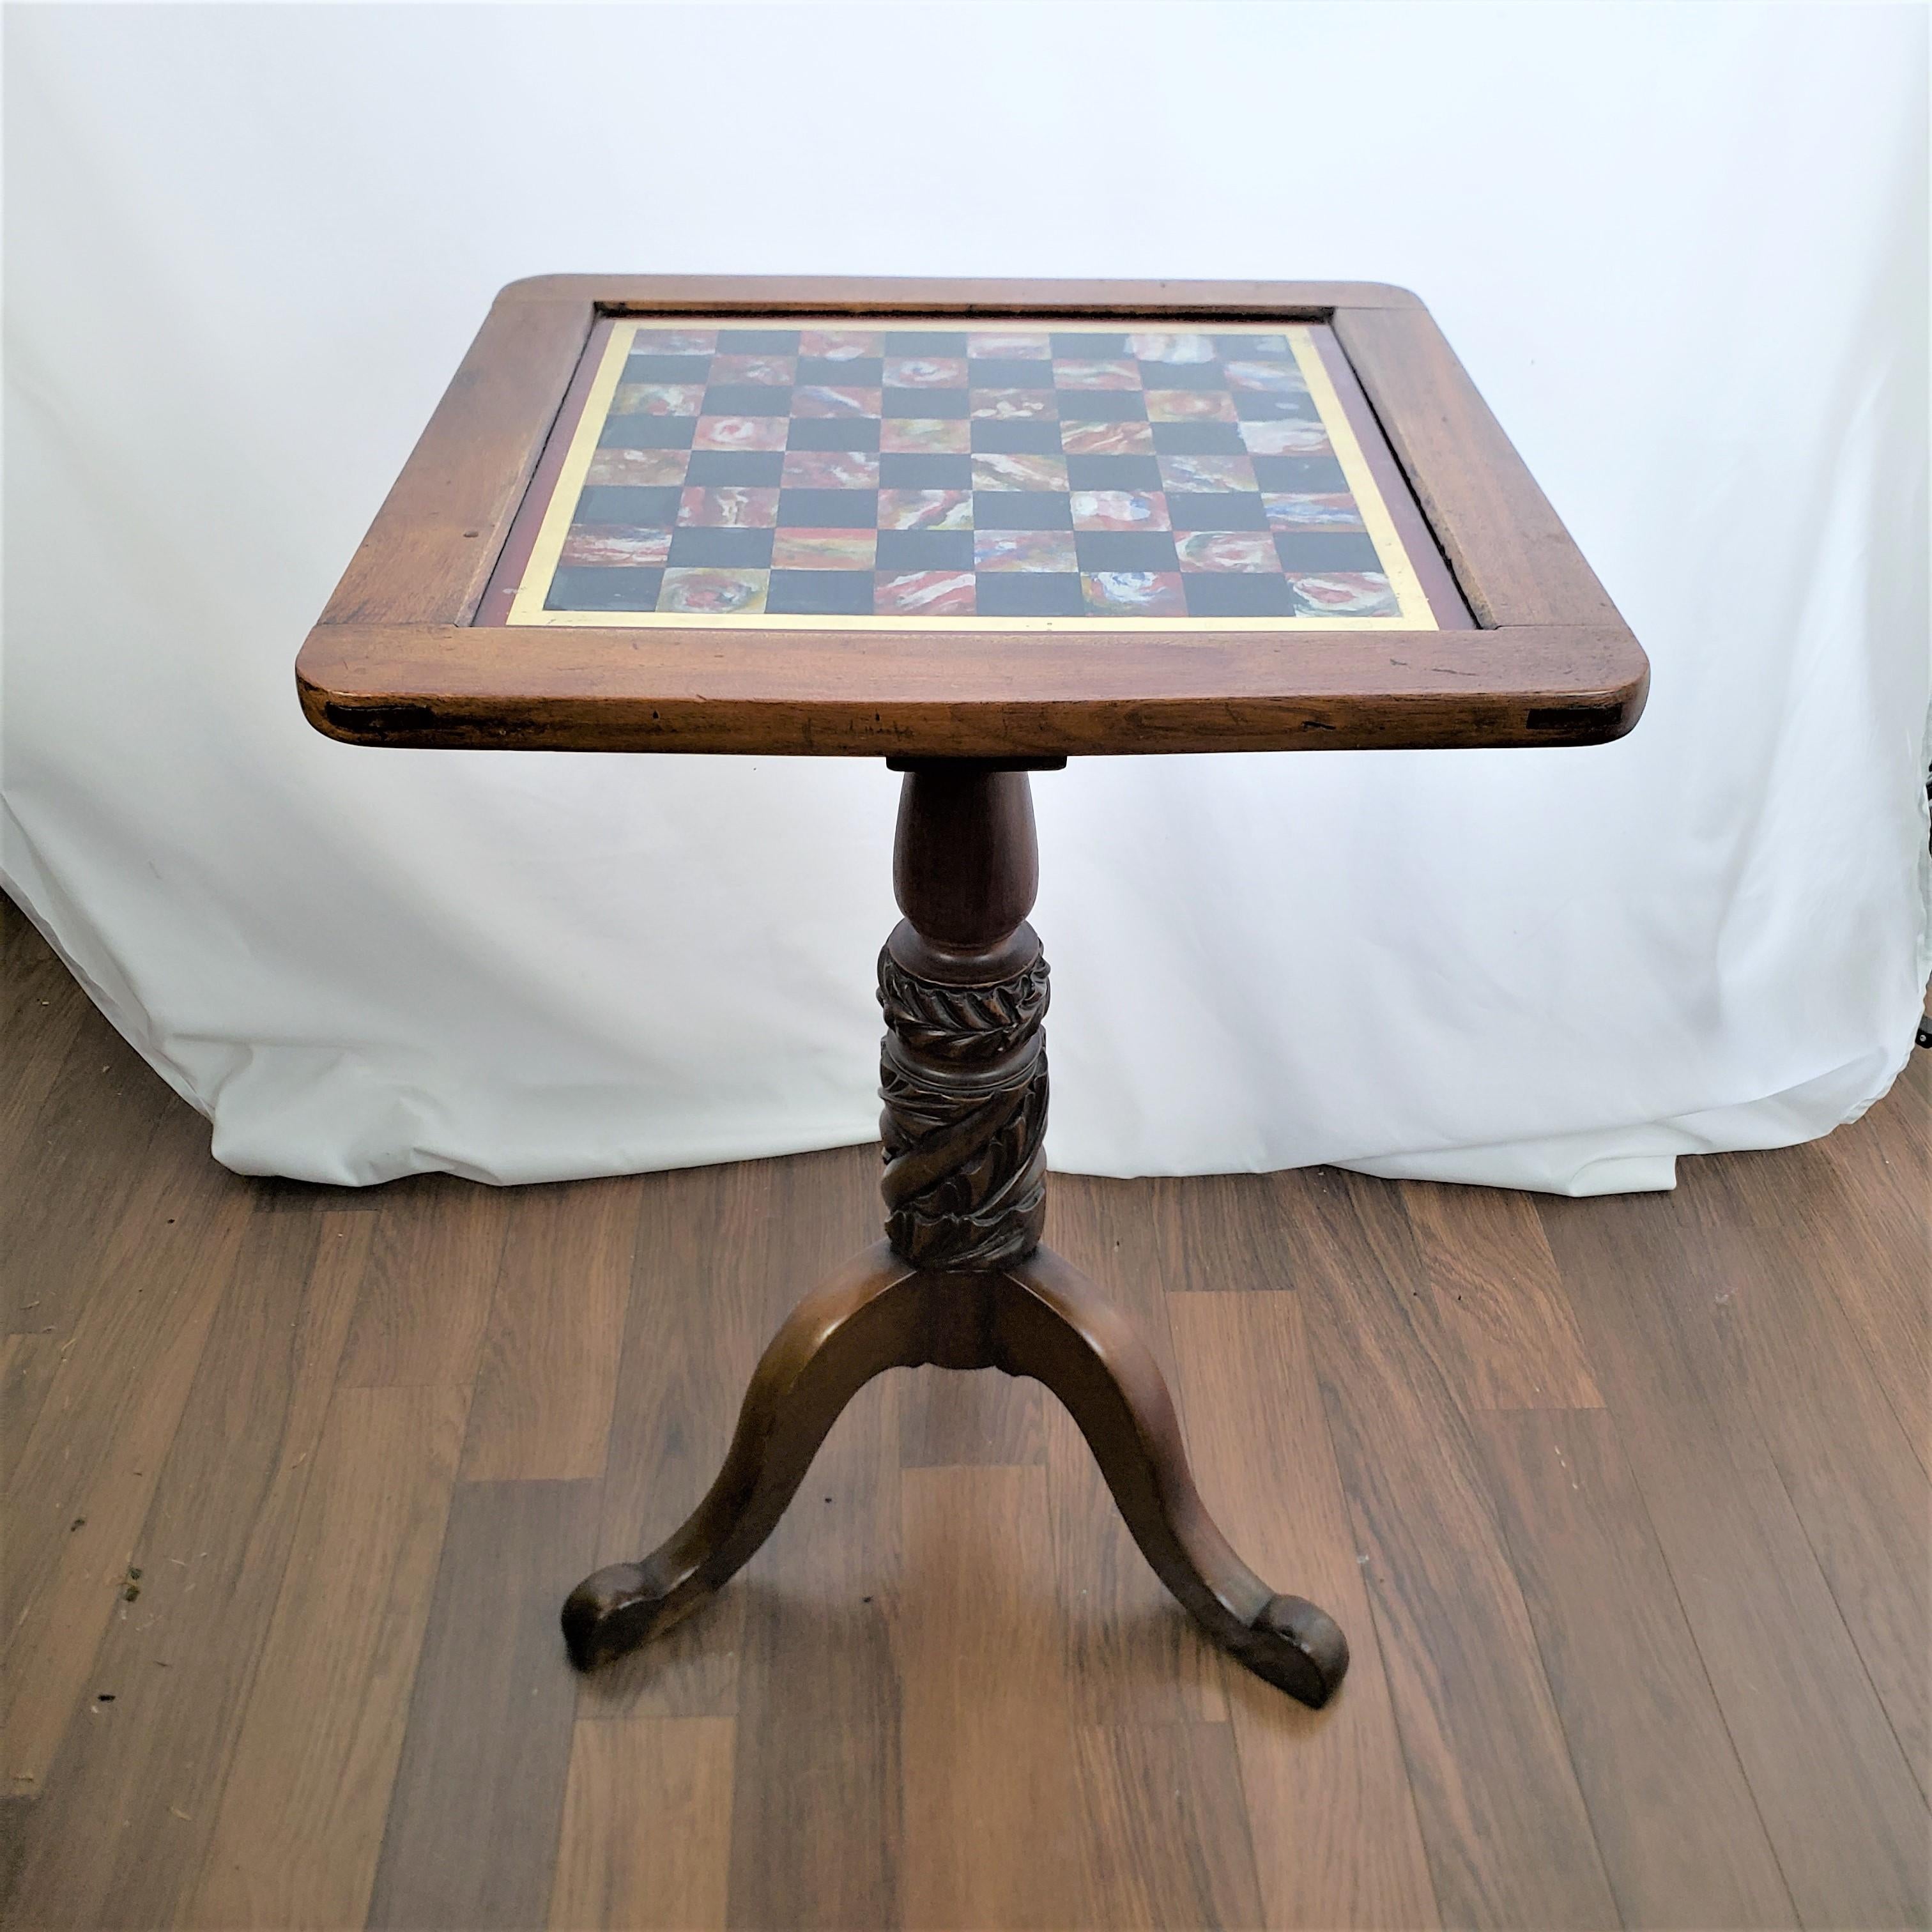 Antique Walnut Chess or Checkers Games Table with Reverse Painted Glass Top In Good Condition For Sale In Hamilton, Ontario